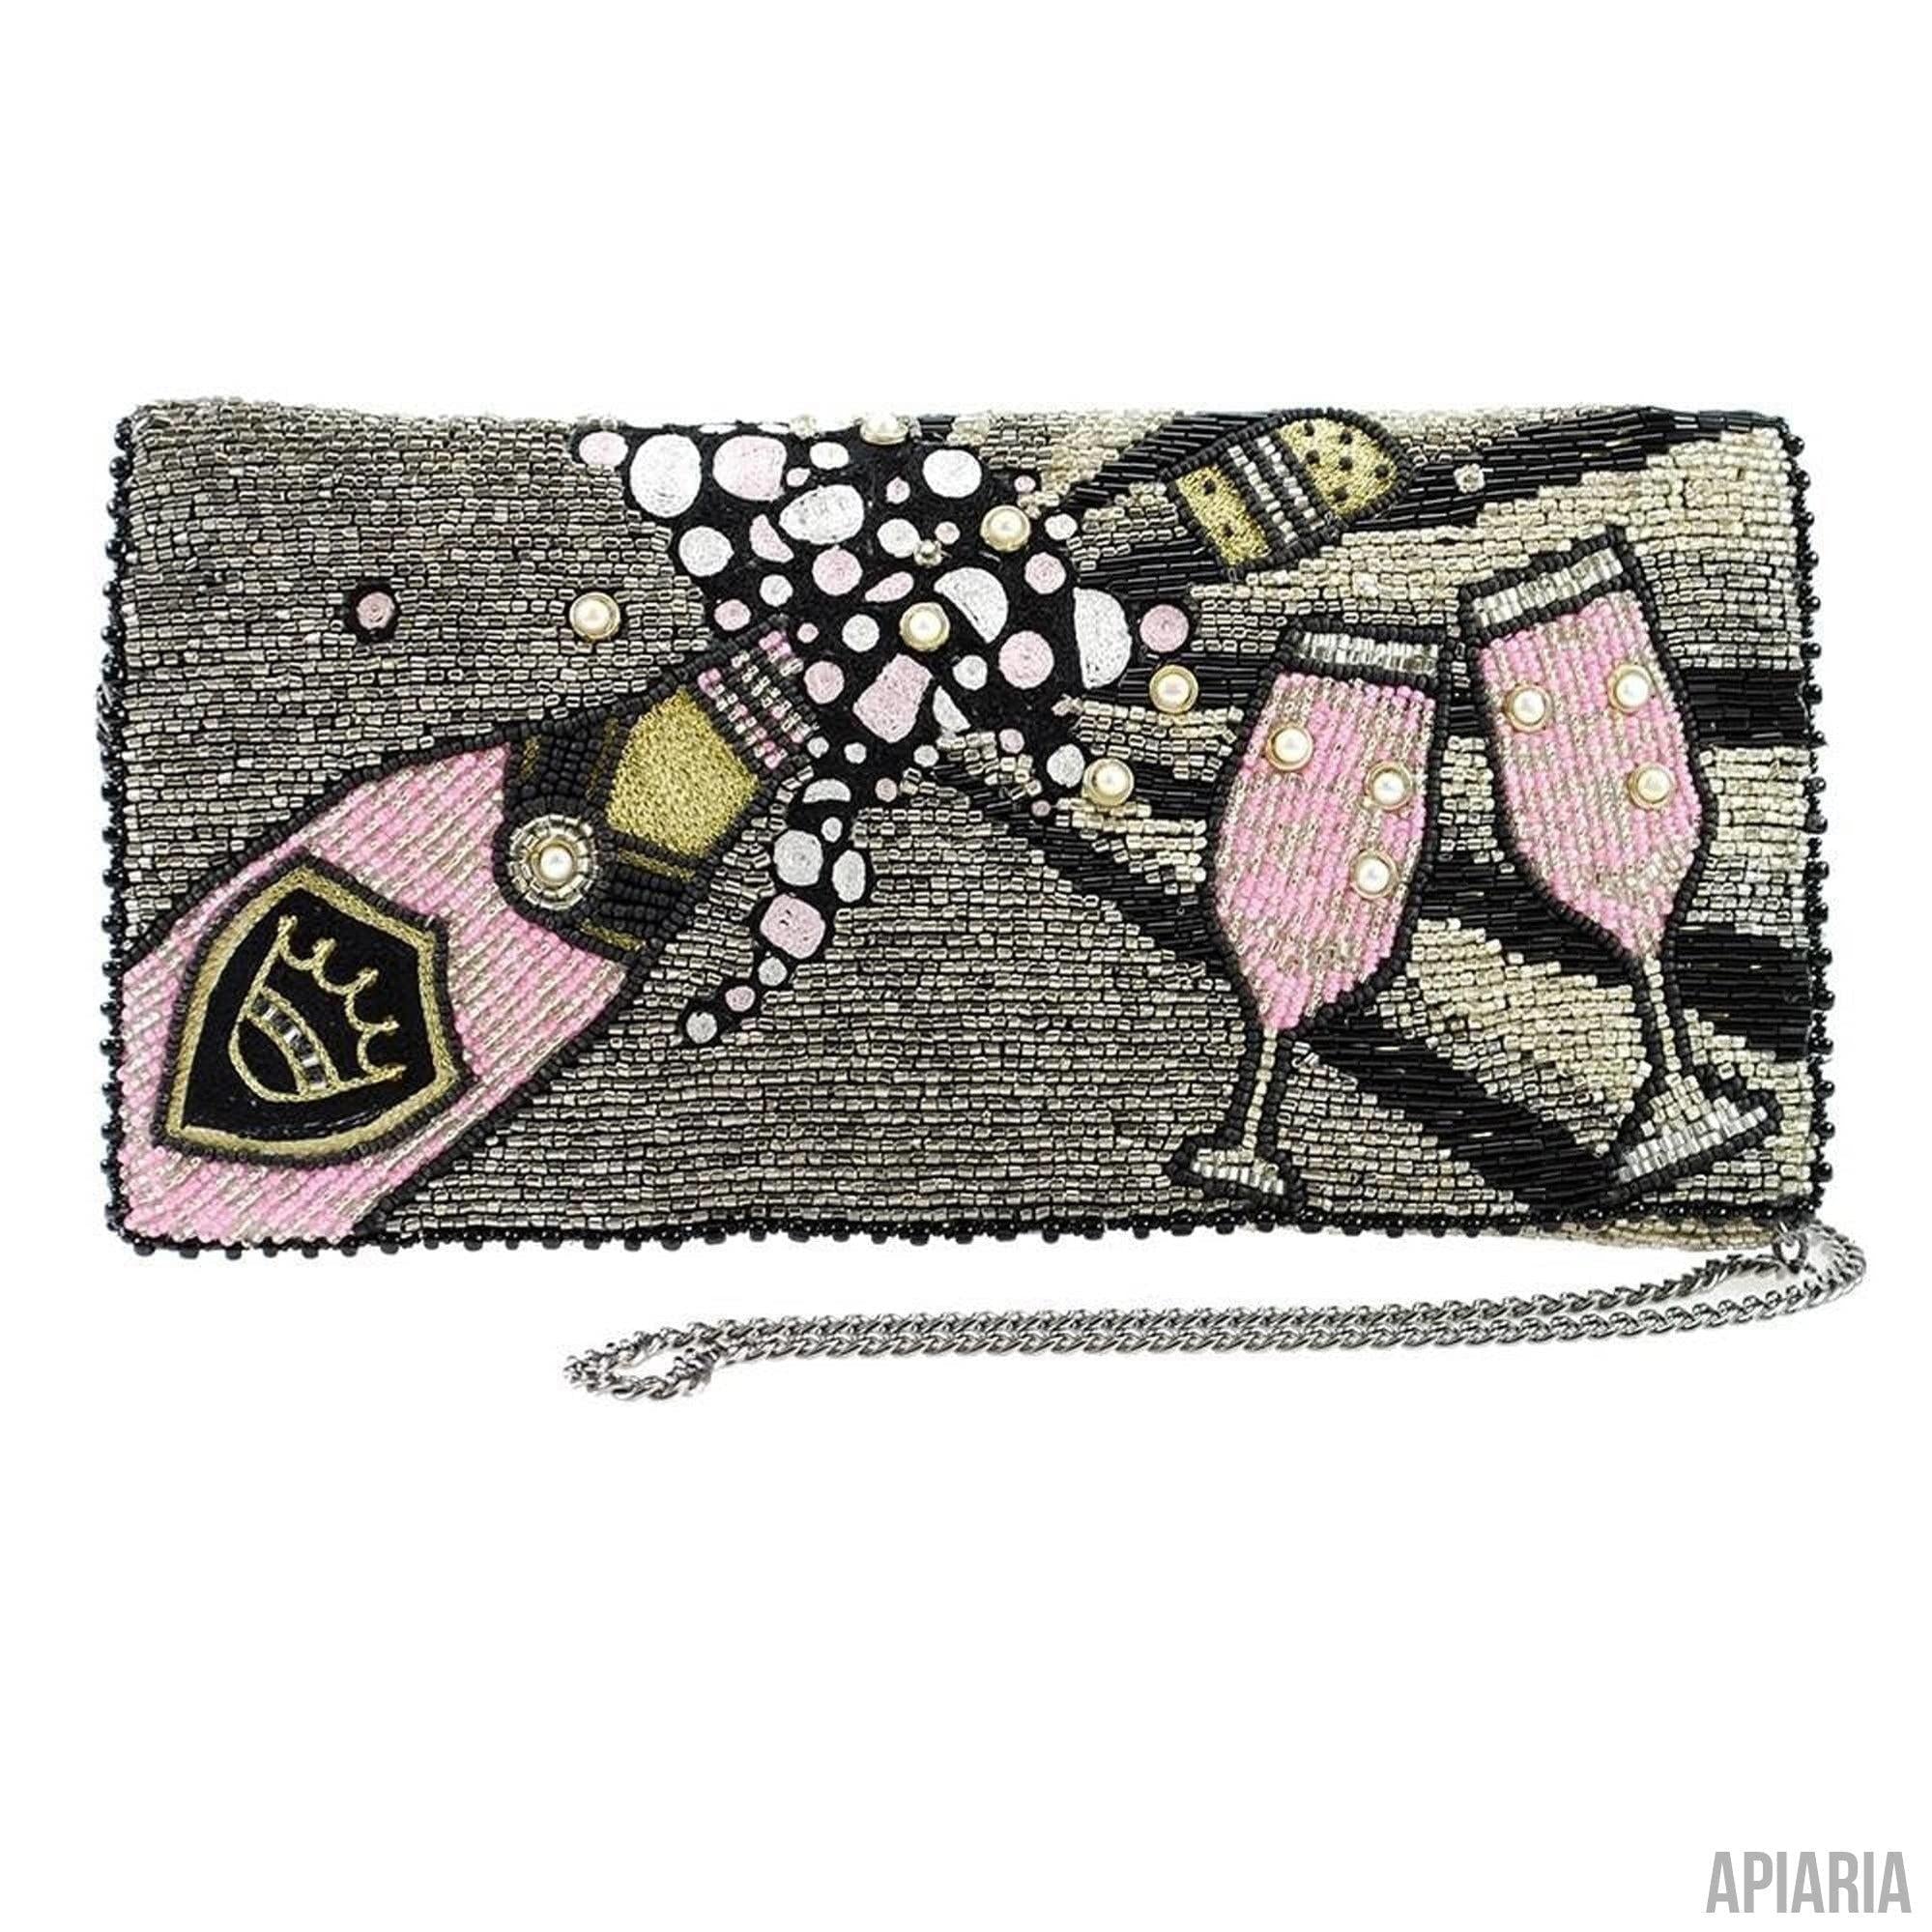 Come to The Party Clutch by Mary Frances, handbag hand beaded and embroidered-Handbag-Apiaria